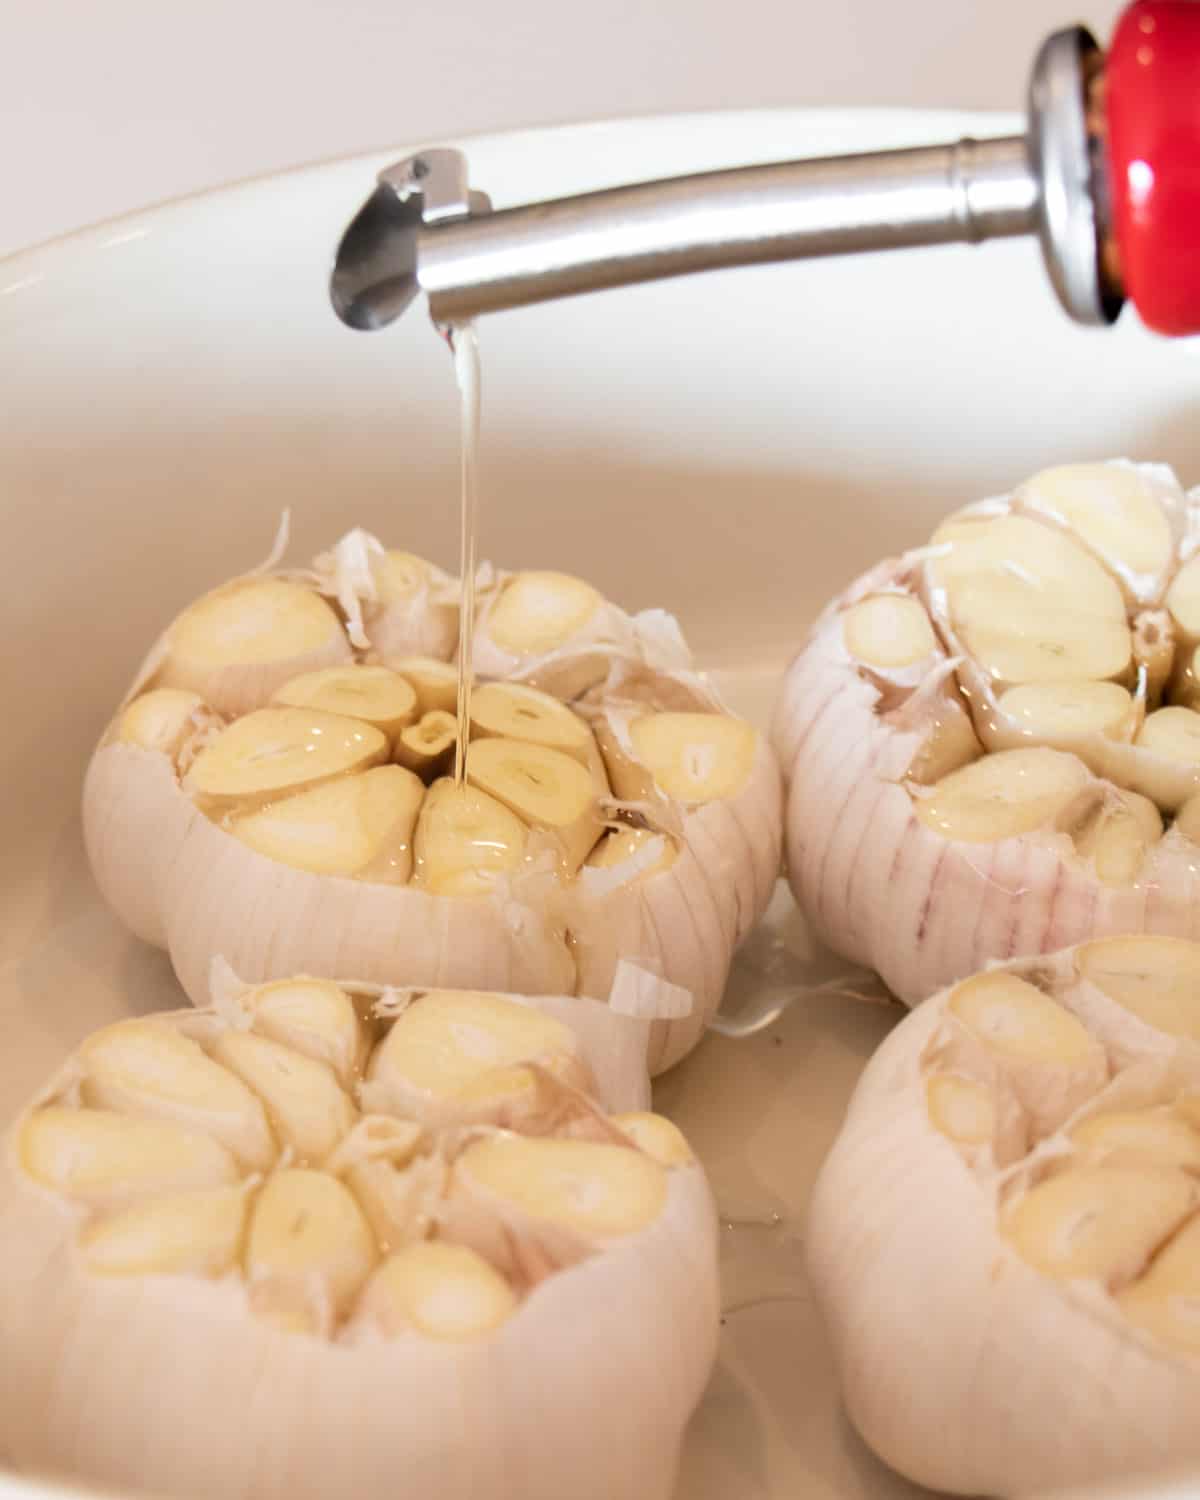 Oil being poured out of a cruet and drizzled on garlic.